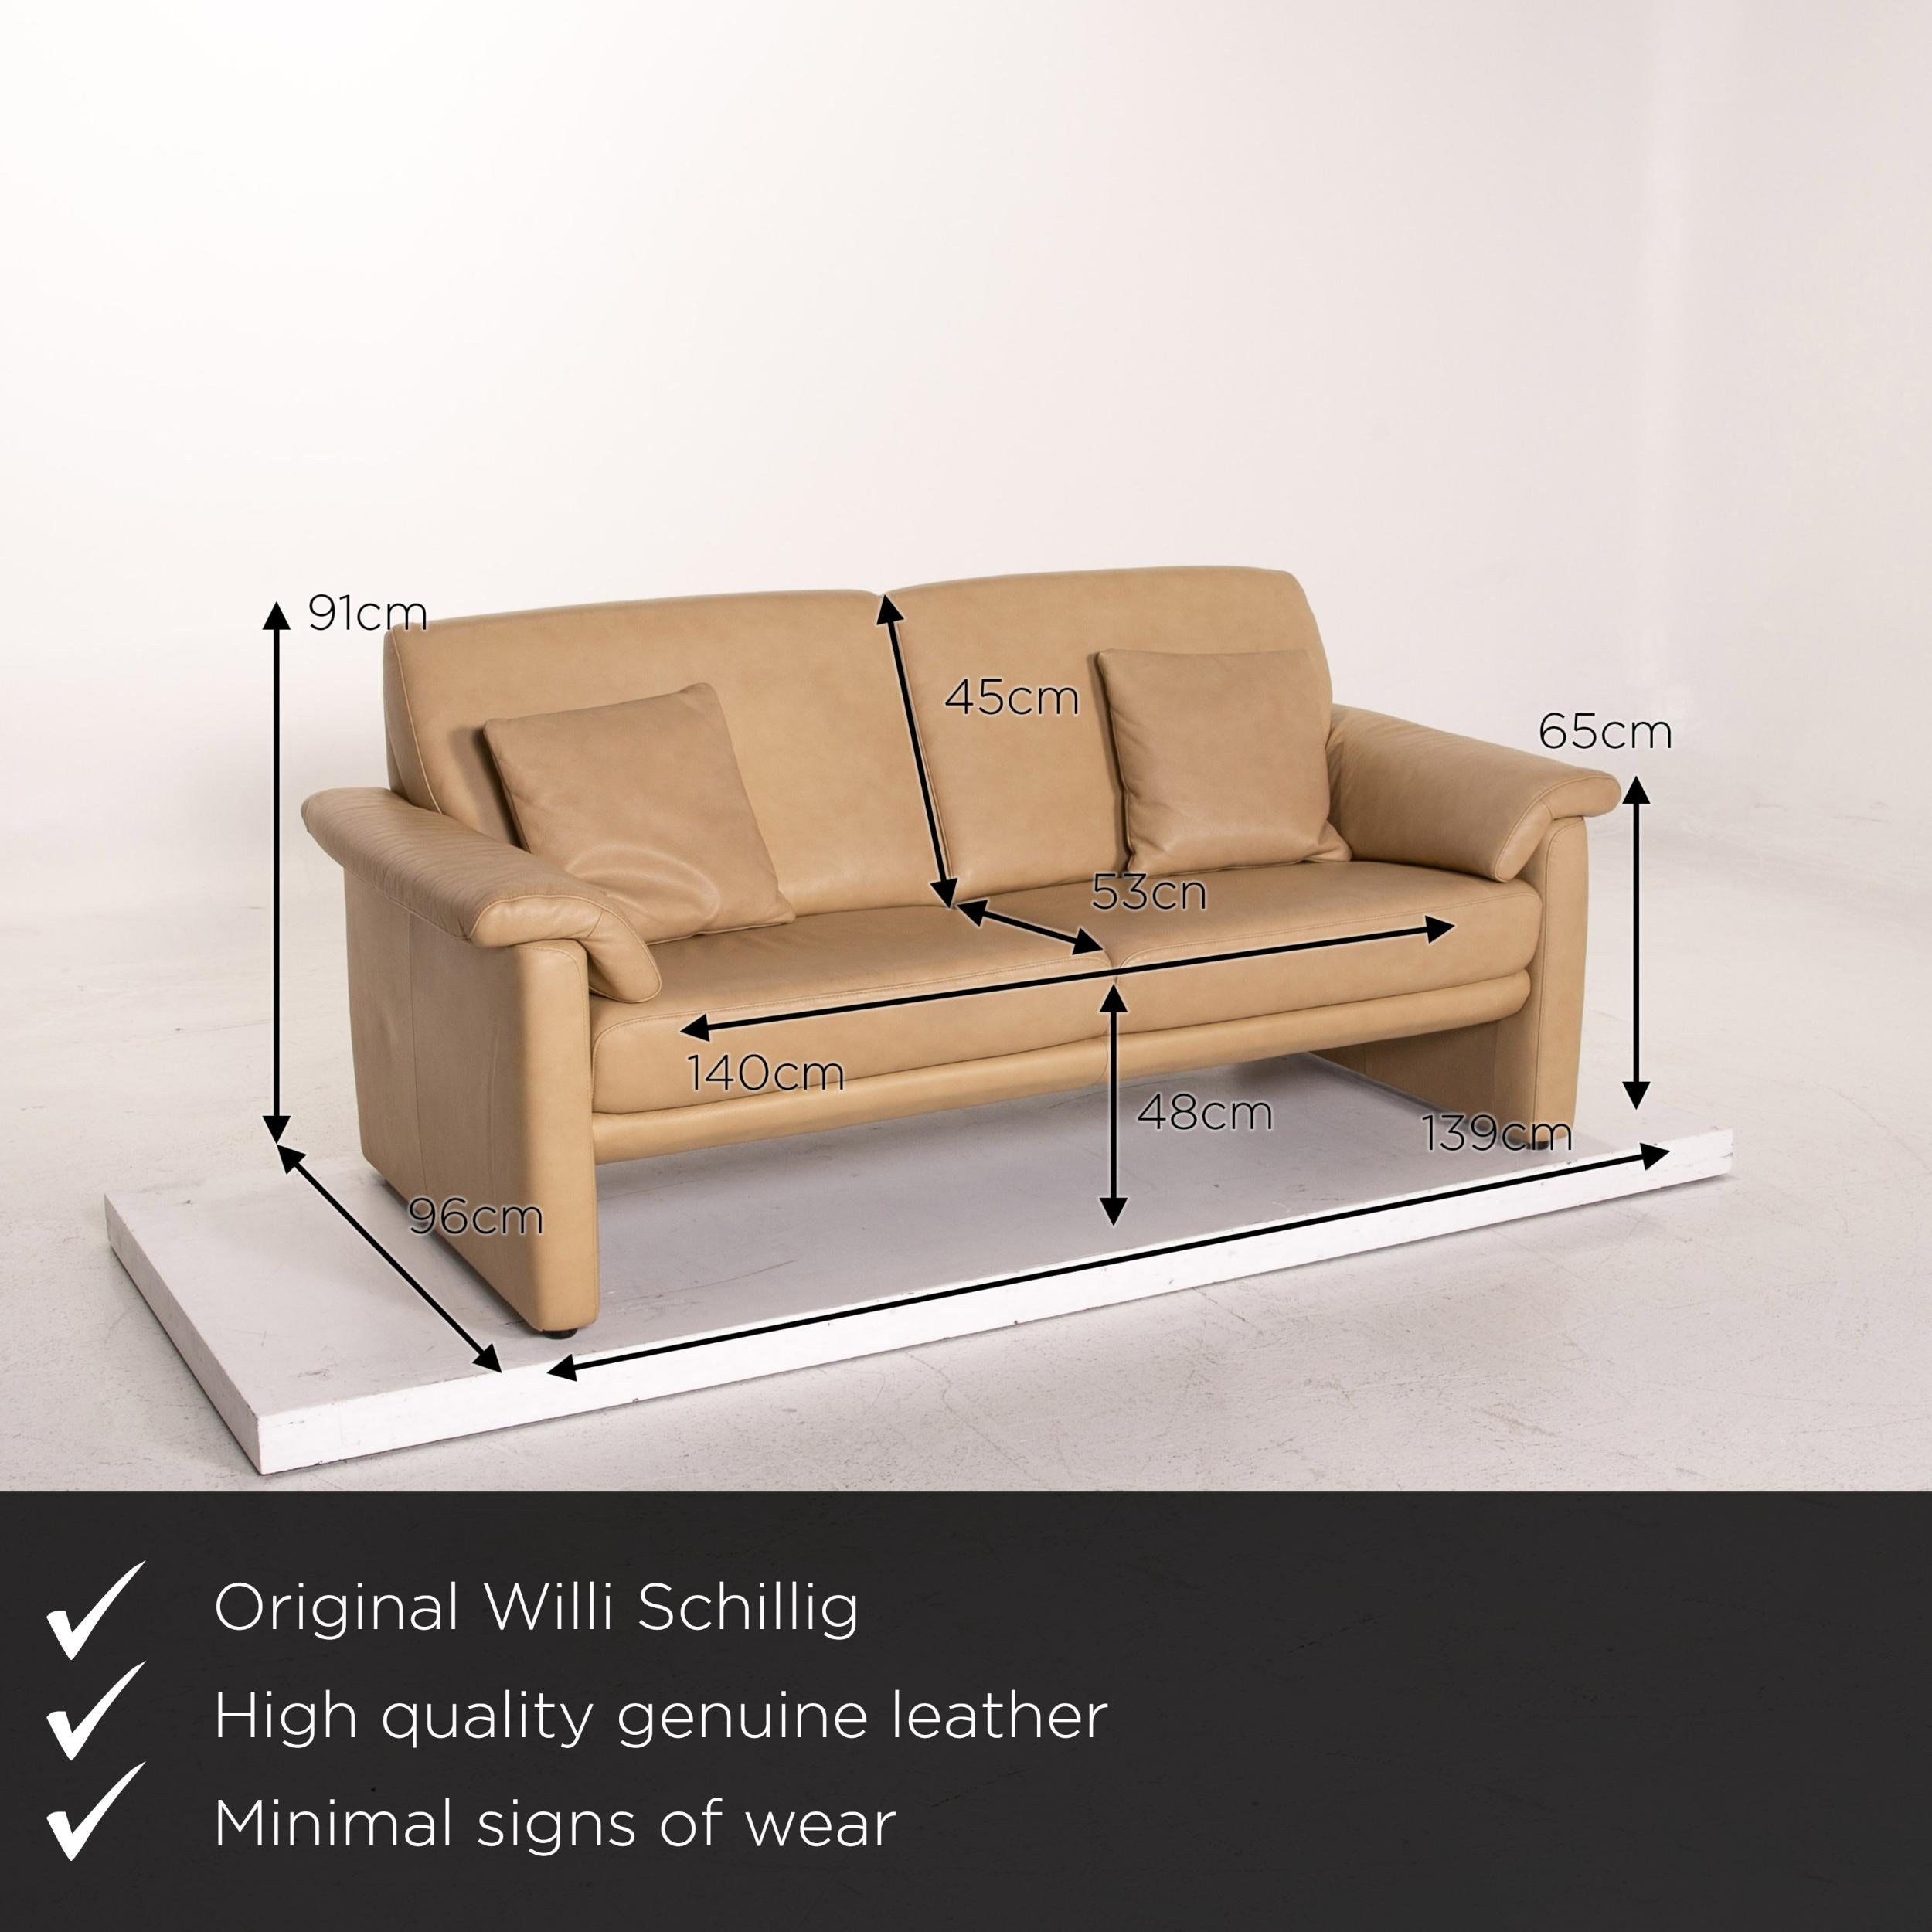 We present to you a Willi Schillig Lucca leather sofa beige two-seat couch.
   
 

 Product measurements in centimeters:
 

Depth 96
Width 139
Height 91
Seat height 48
Rest height 65
Seat depth 53
Seat width 140
Back height 45.